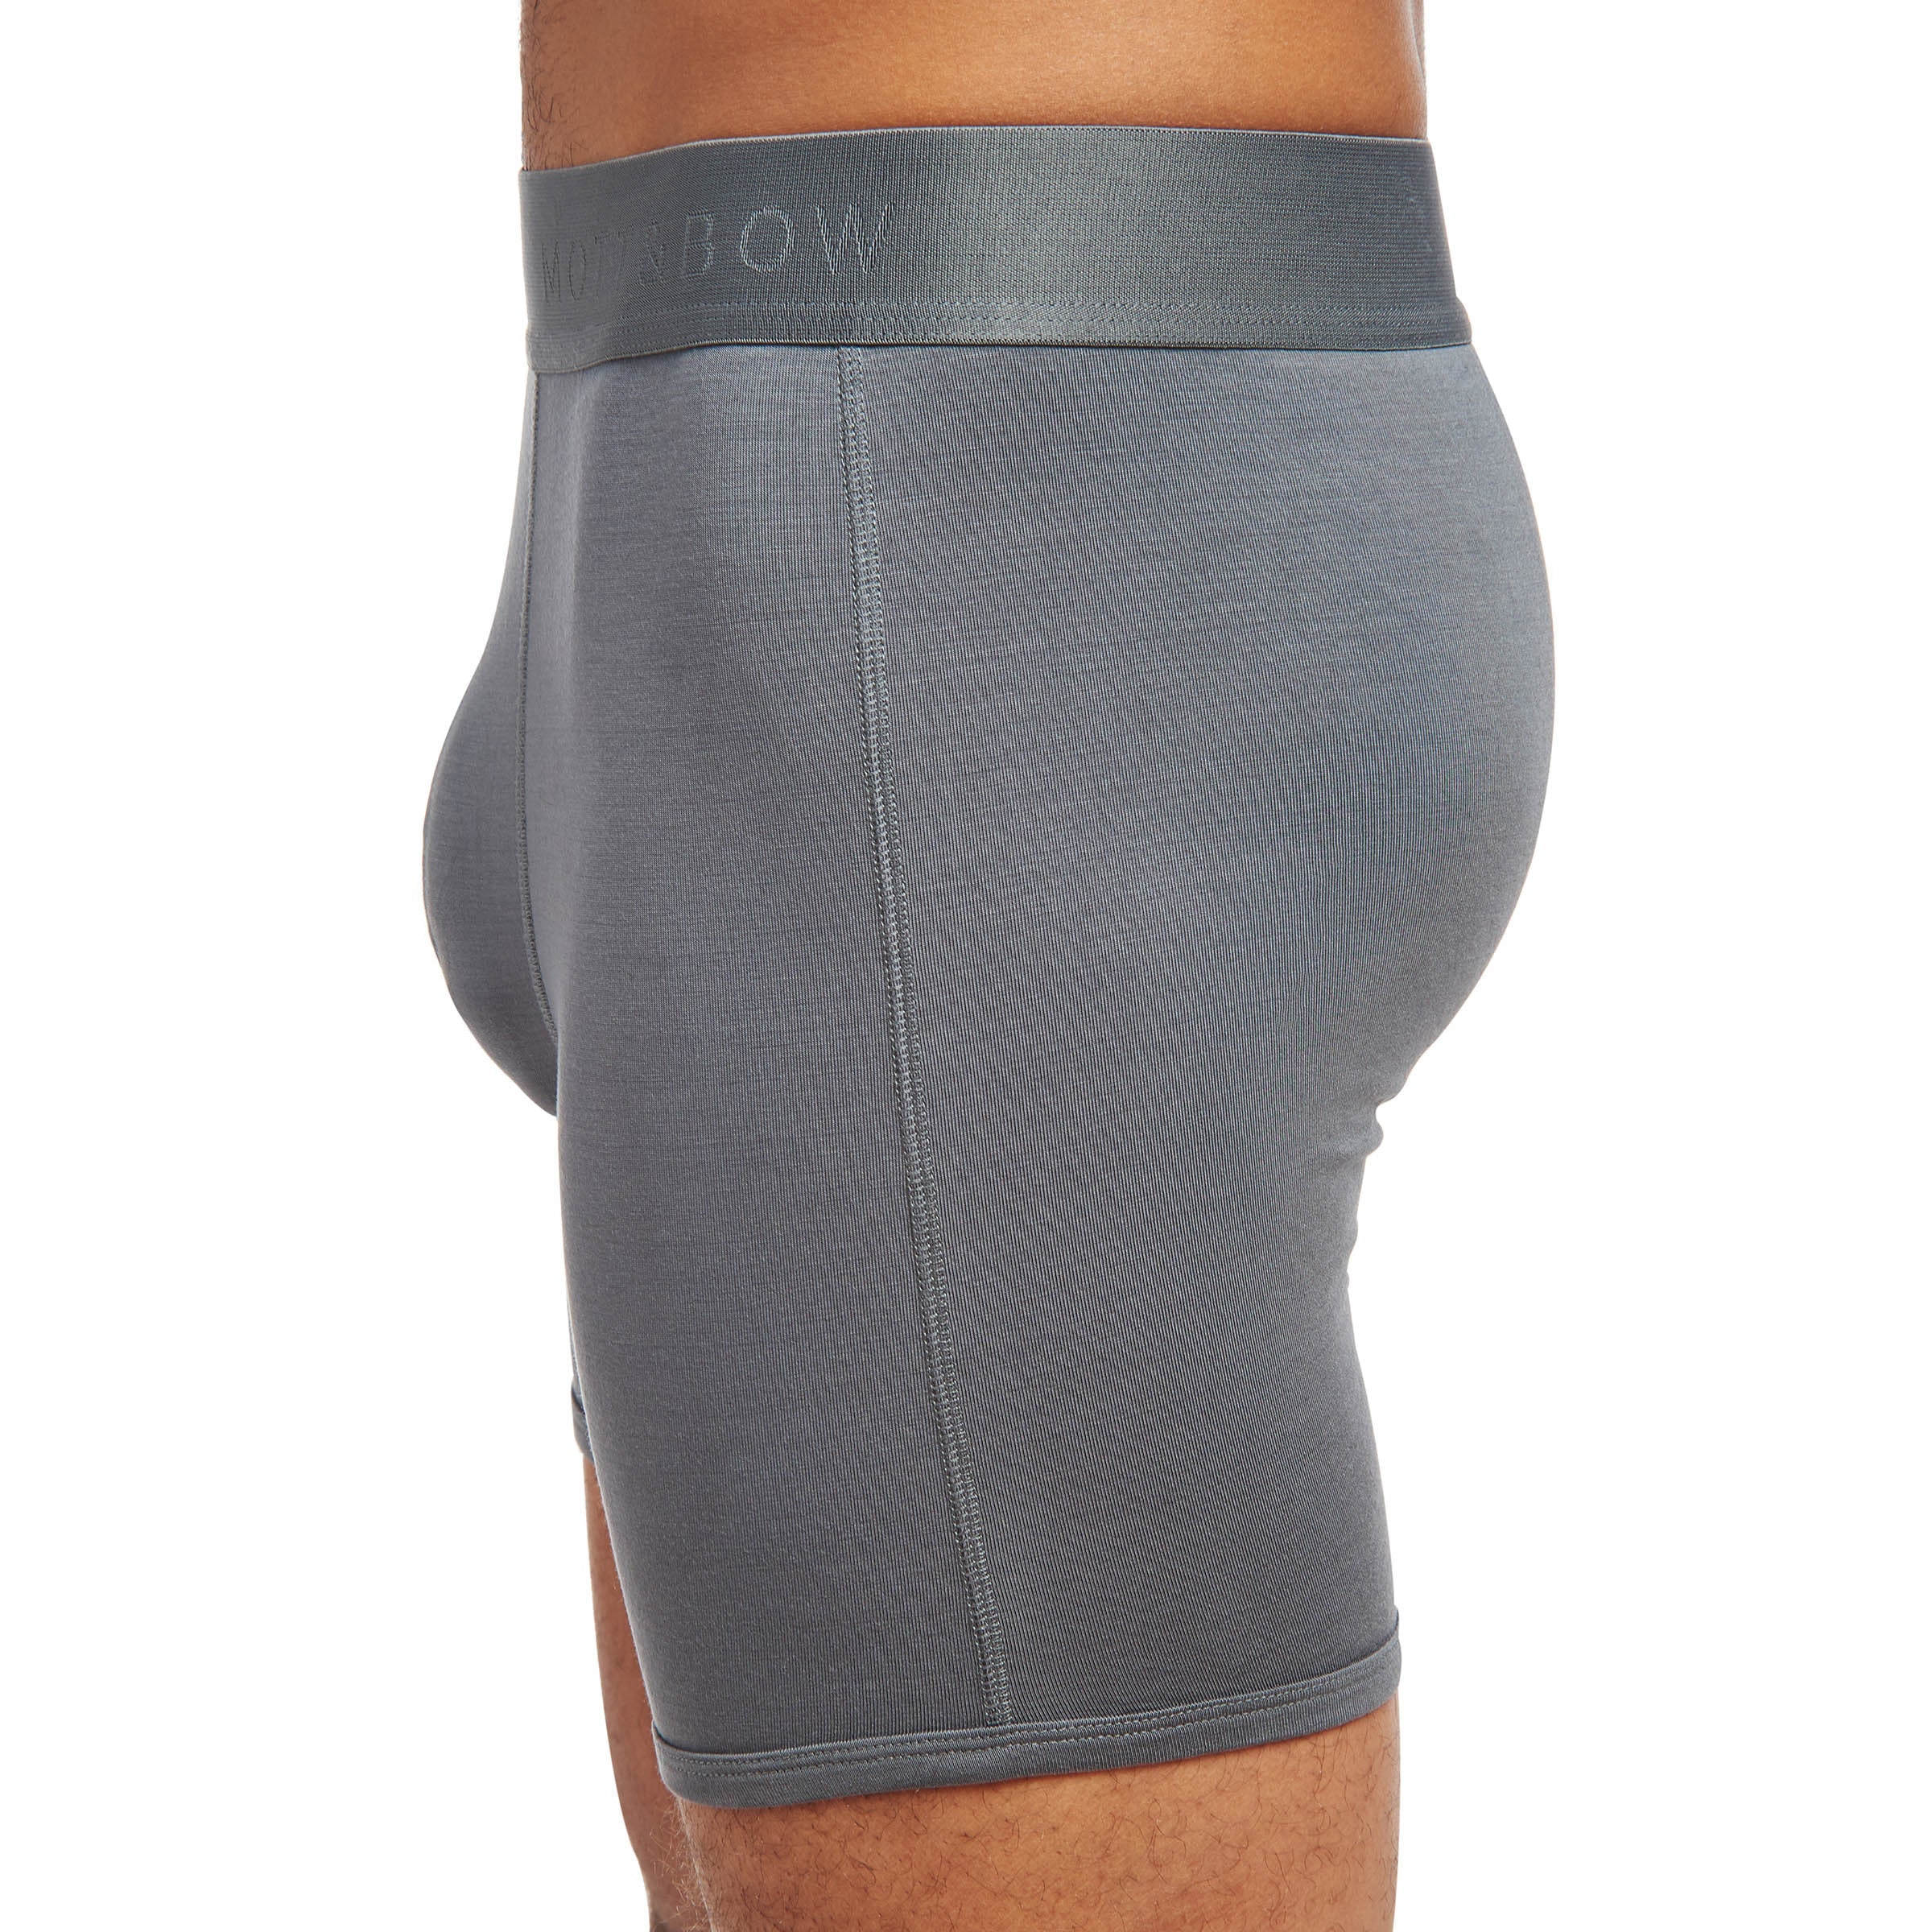 Men wearing Gray Copy of Second Skin Boxer Brief